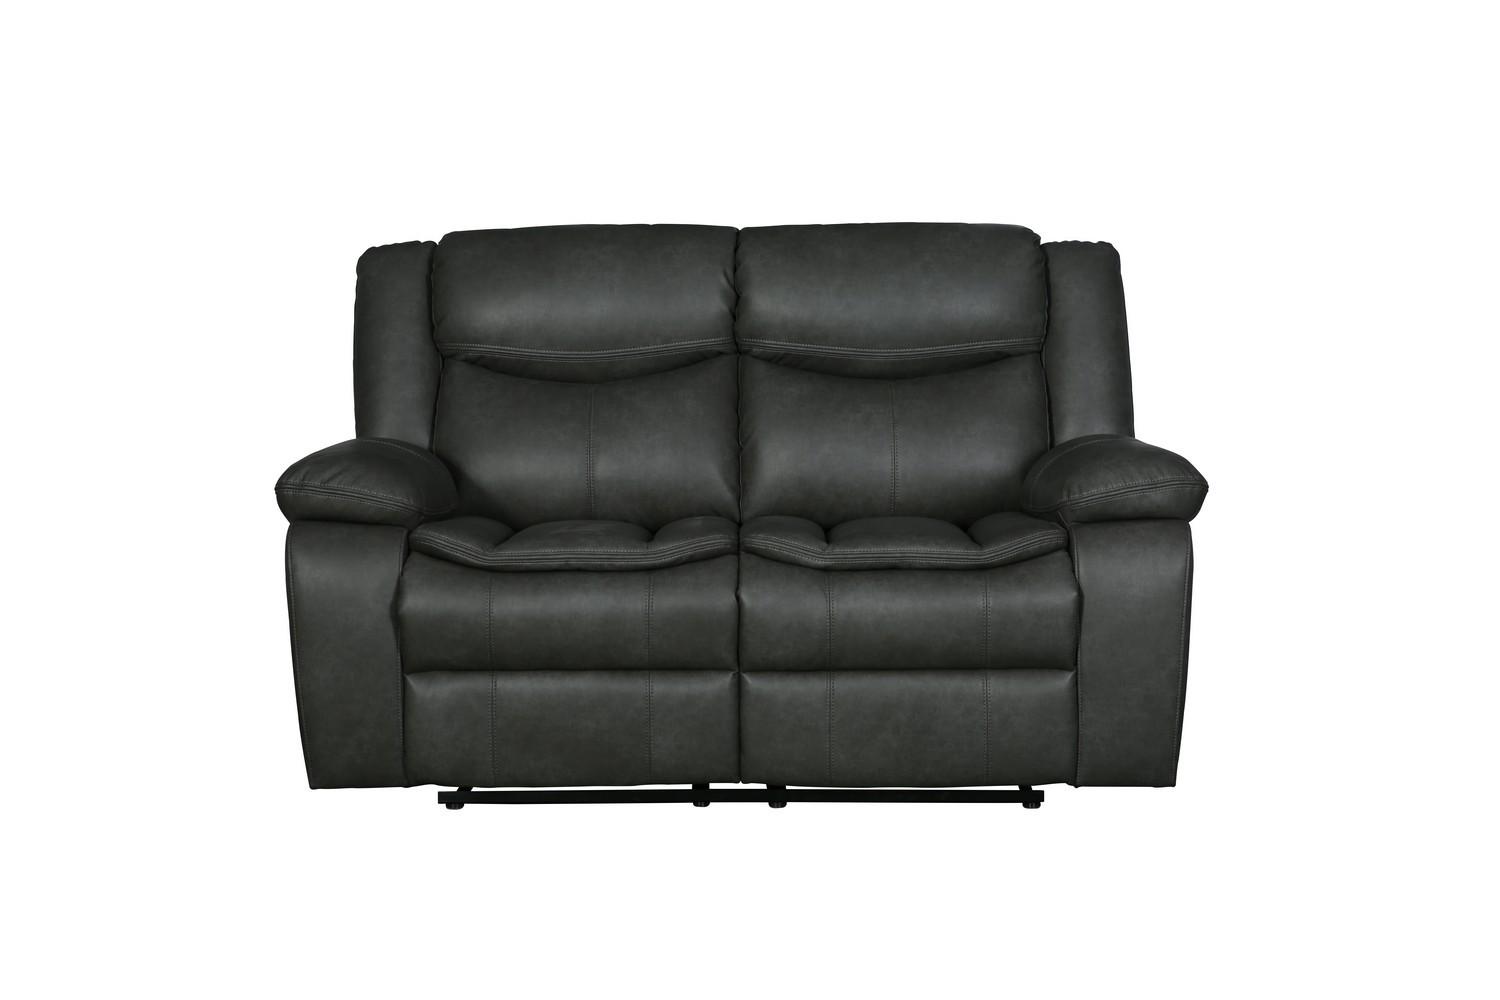 Contemporary Reclining Loveseat 6967 Reclining Loveseat 6967-GRAY-L 6967-GRAY-L in Gray leather Air